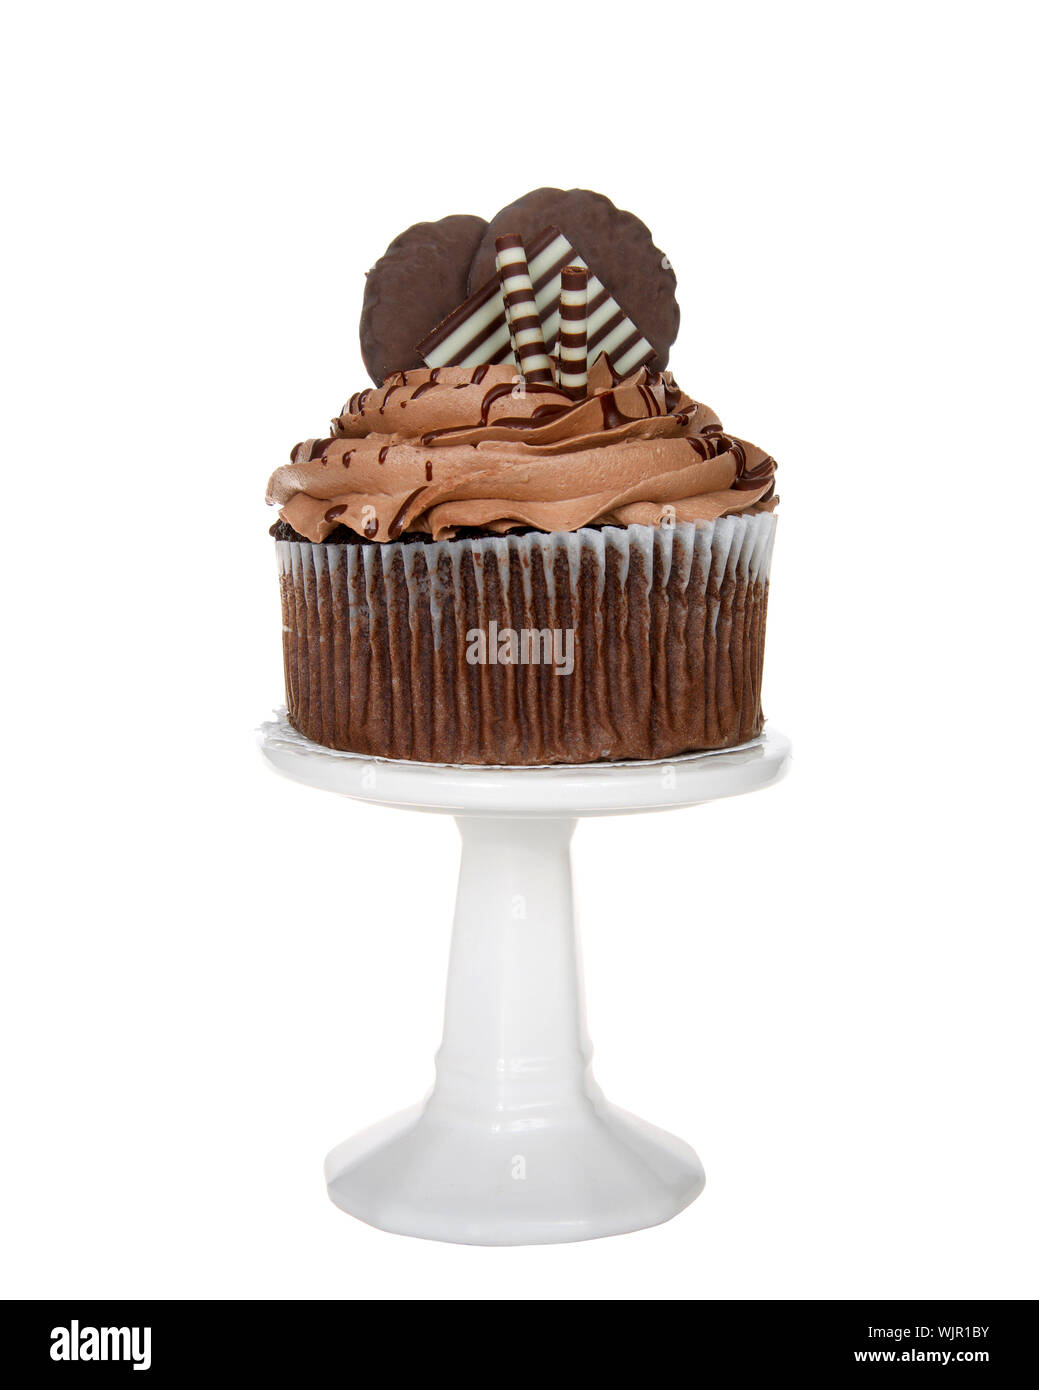 Giant chocolate cup cake with chocolate frosting, candy and cookies embellishing sitting on a white pedestal isolated on white. Stock Photo